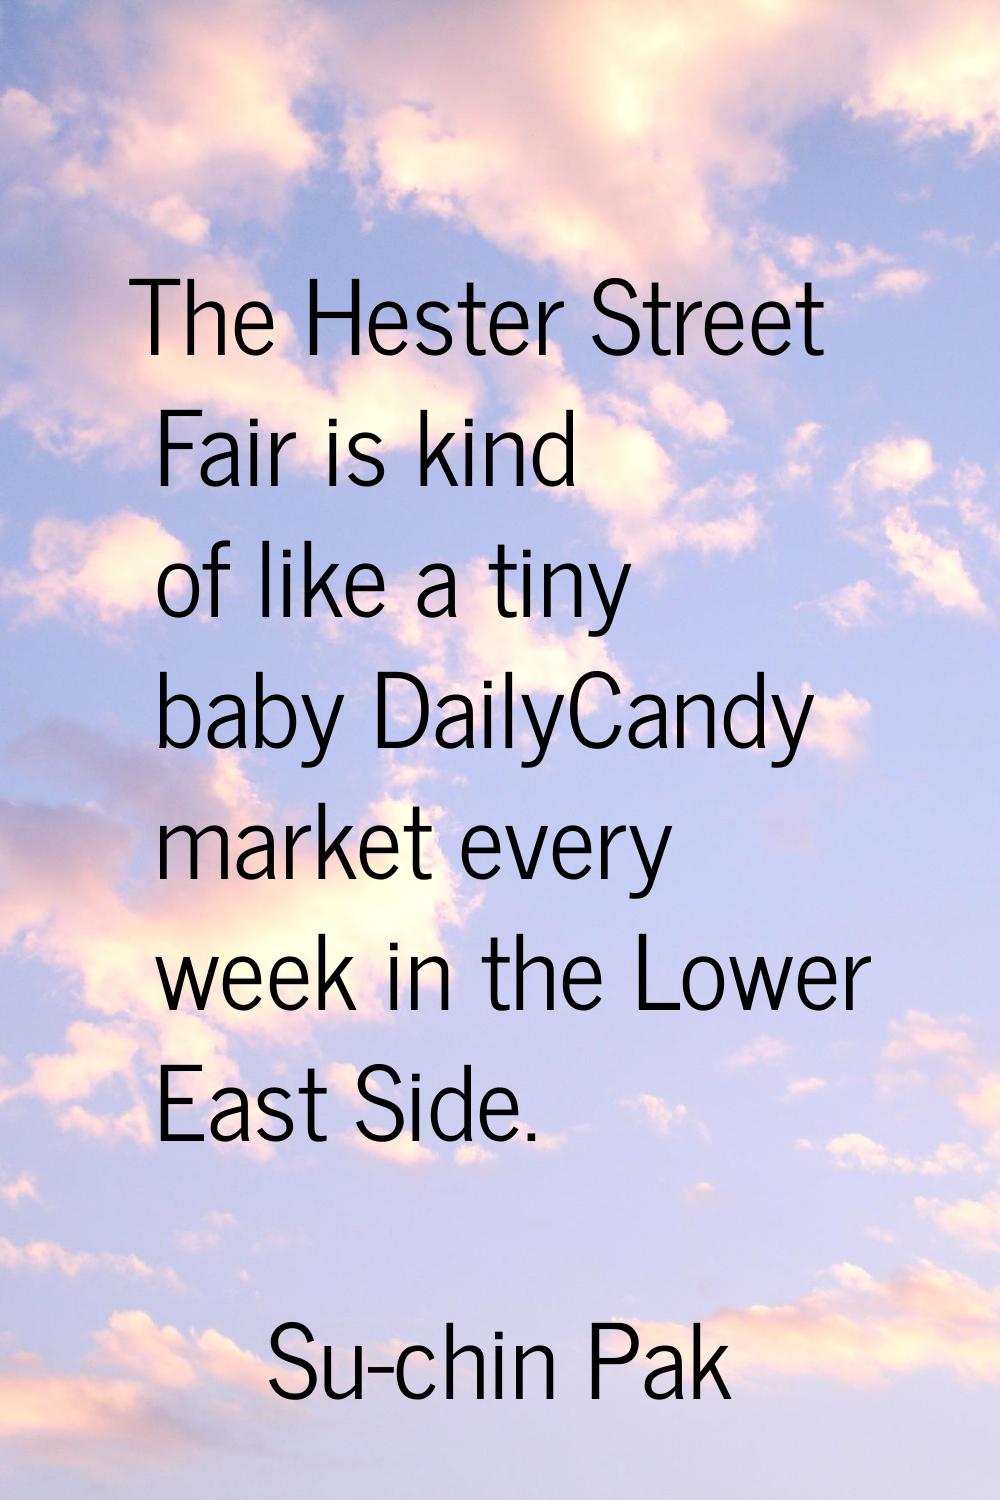 The Hester Street Fair is kind of like a tiny baby DailyCandy market every week in the Lower East S